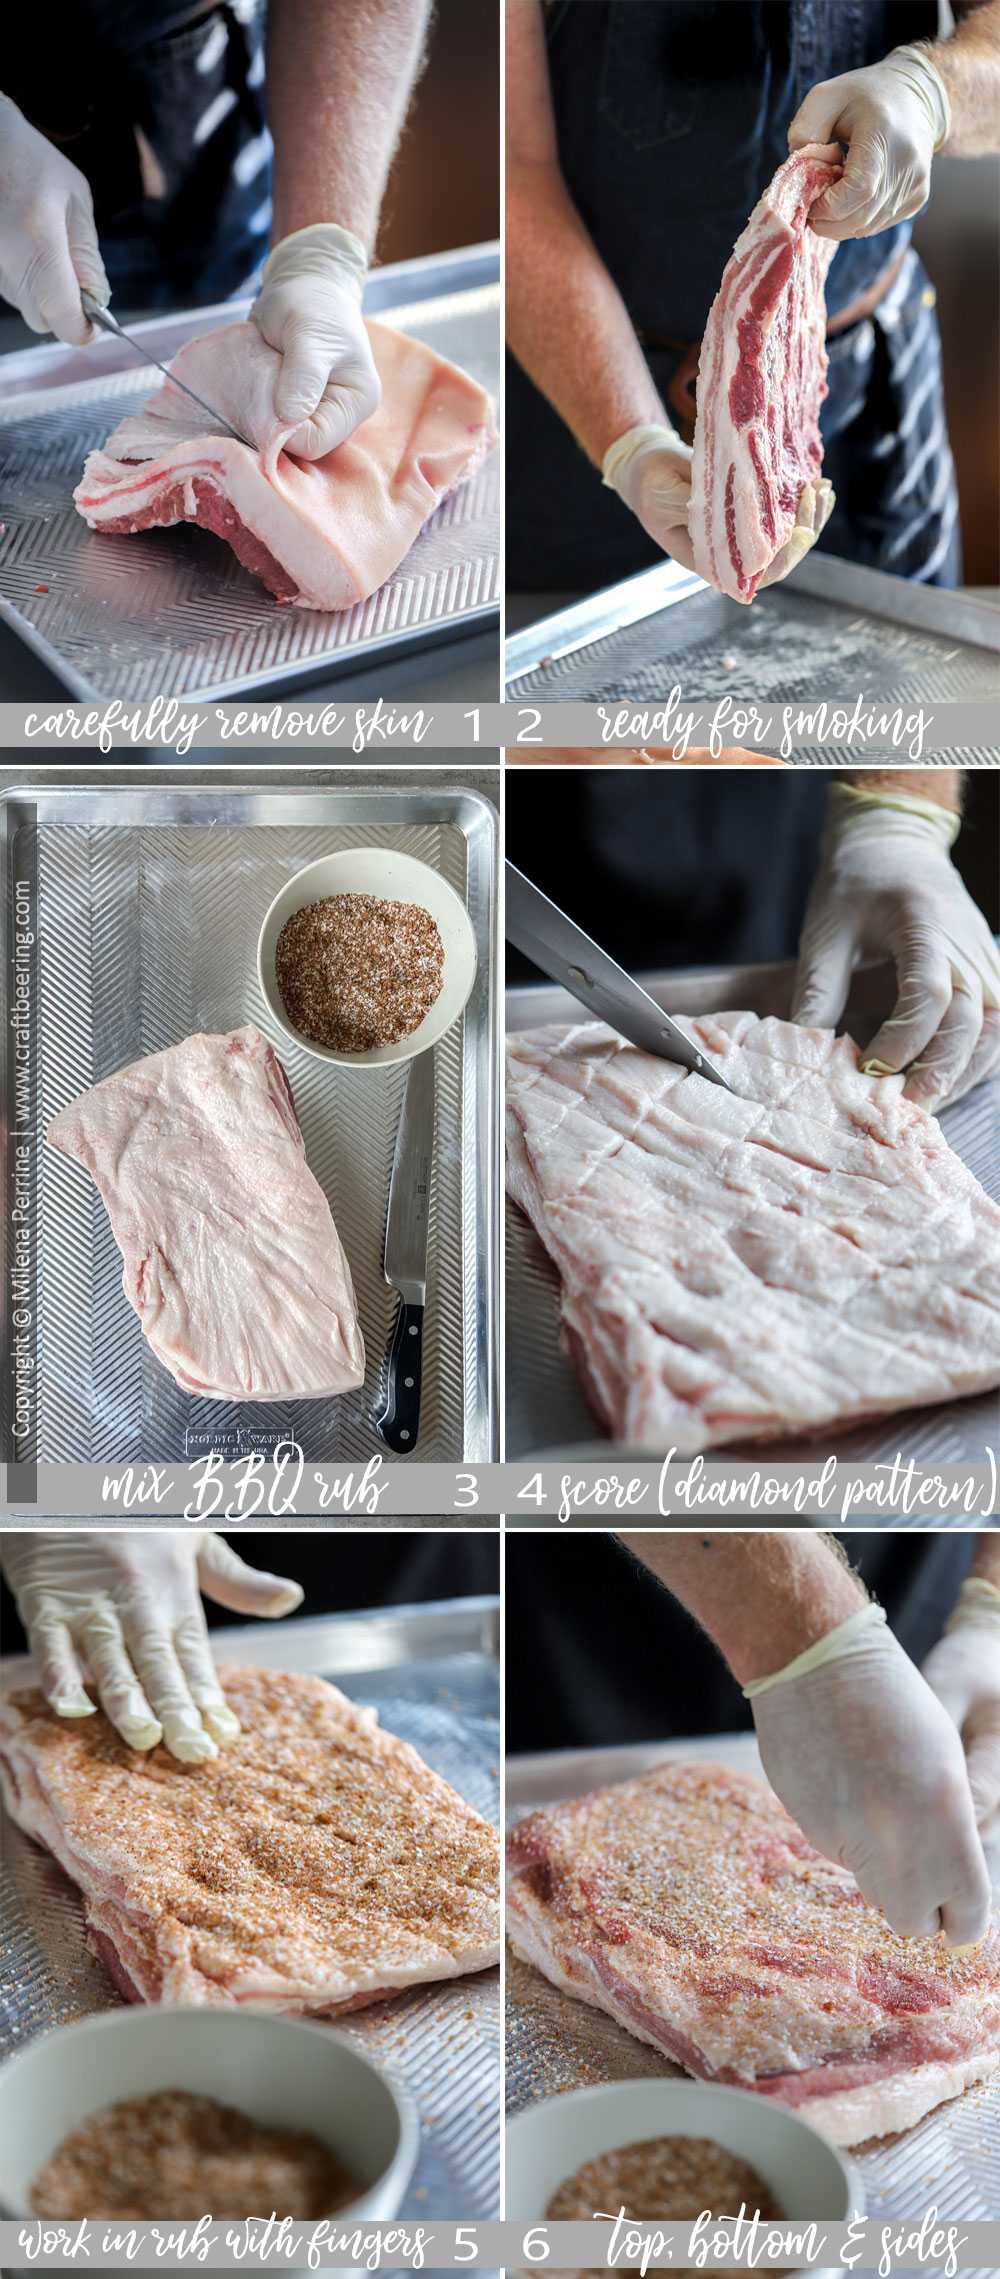 Step by step preparing pork belly for smoking with BBQ rub - removing the skin, scoring the pork belly and rubbing all sides. . 